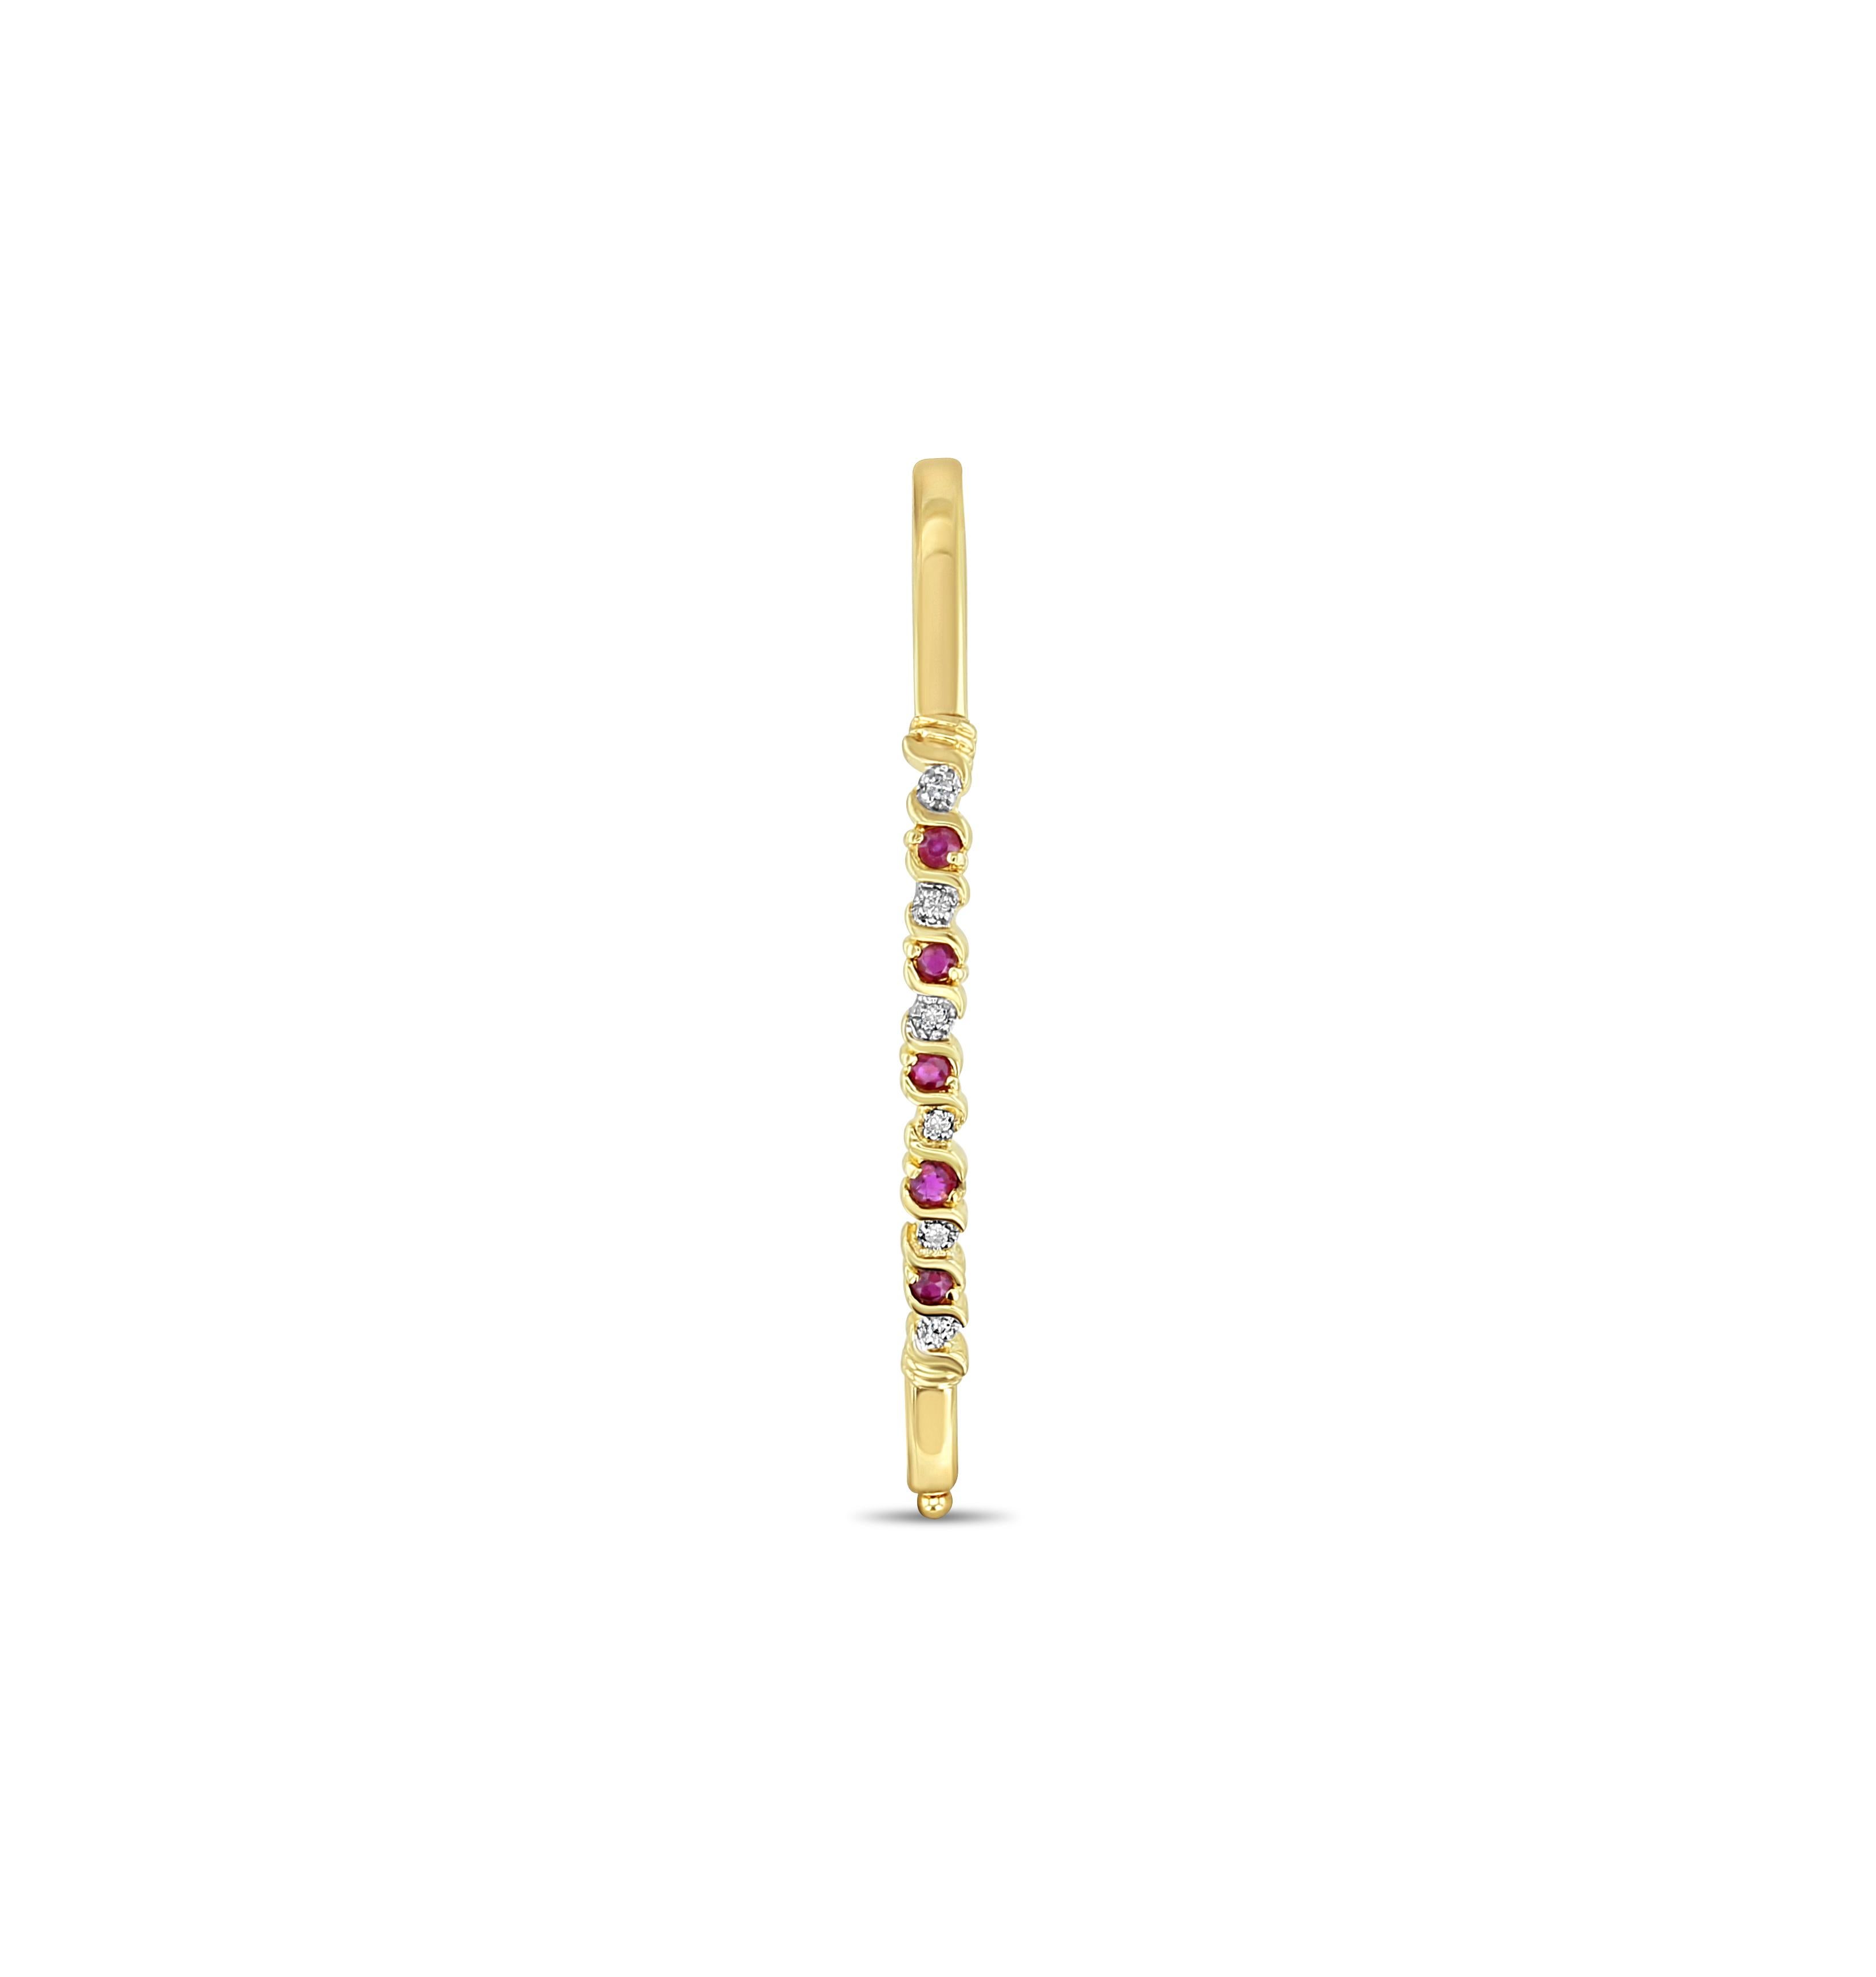 ♥ Bangle Description ♥

Main Stone: Diamonds & Ruby 
Approx. Total Carat Weight: .44cttw
Ruby Carat Weight: .38ct
Metal Type: 14K Yellow Gold 
Stone Cut: Round
Metal Weight: 6 grams
Bracelet Width (outside diameter):  2.4 inches